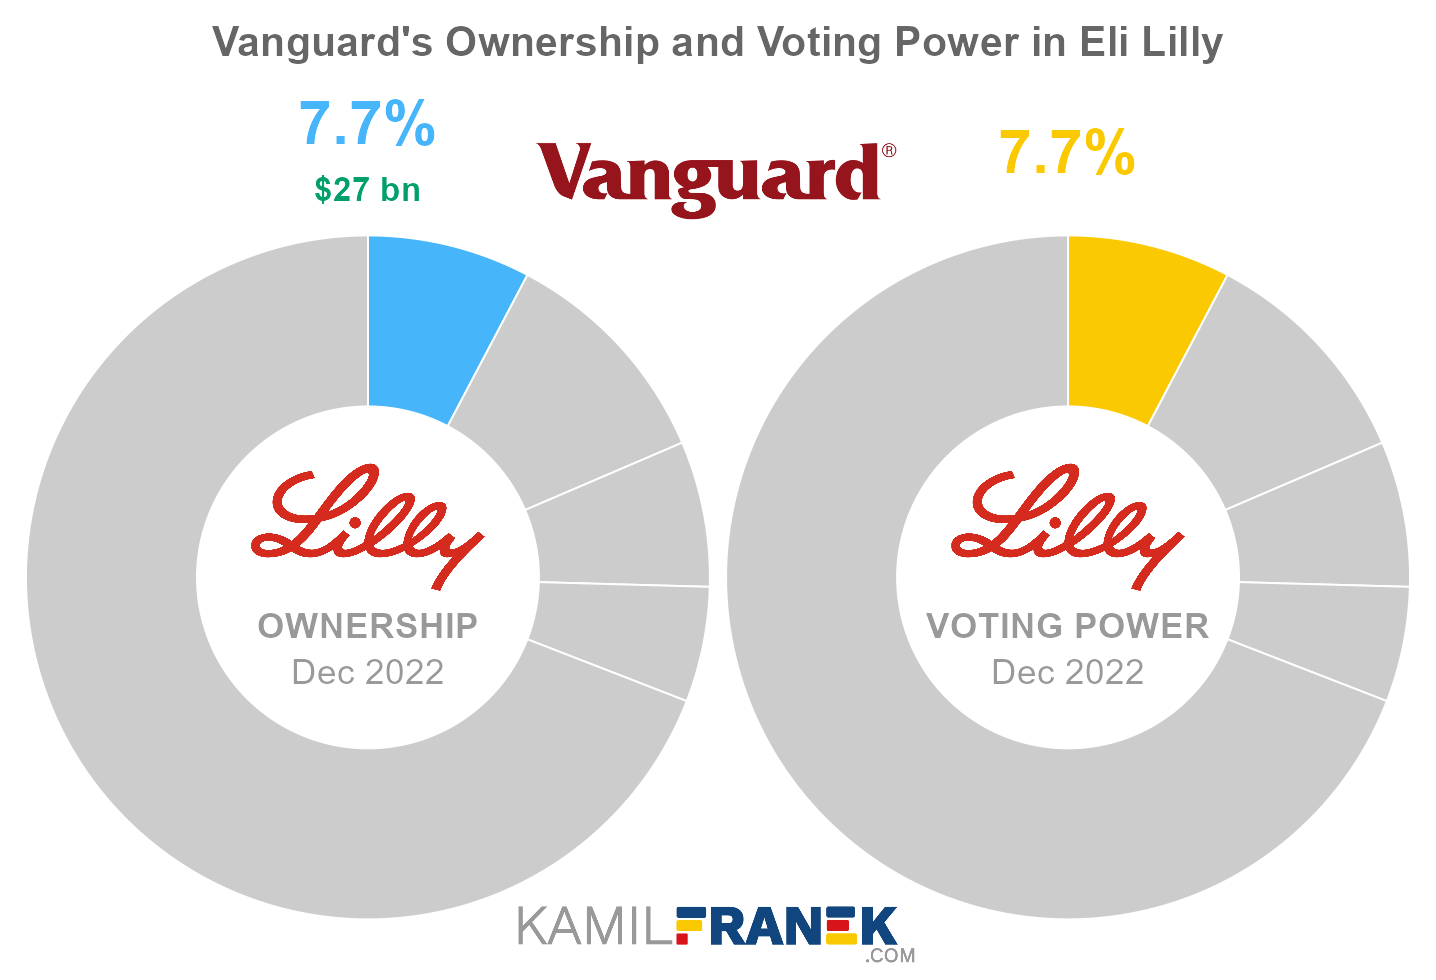 Vanguard's share ownership and voting power in Eli Lilly (chart)